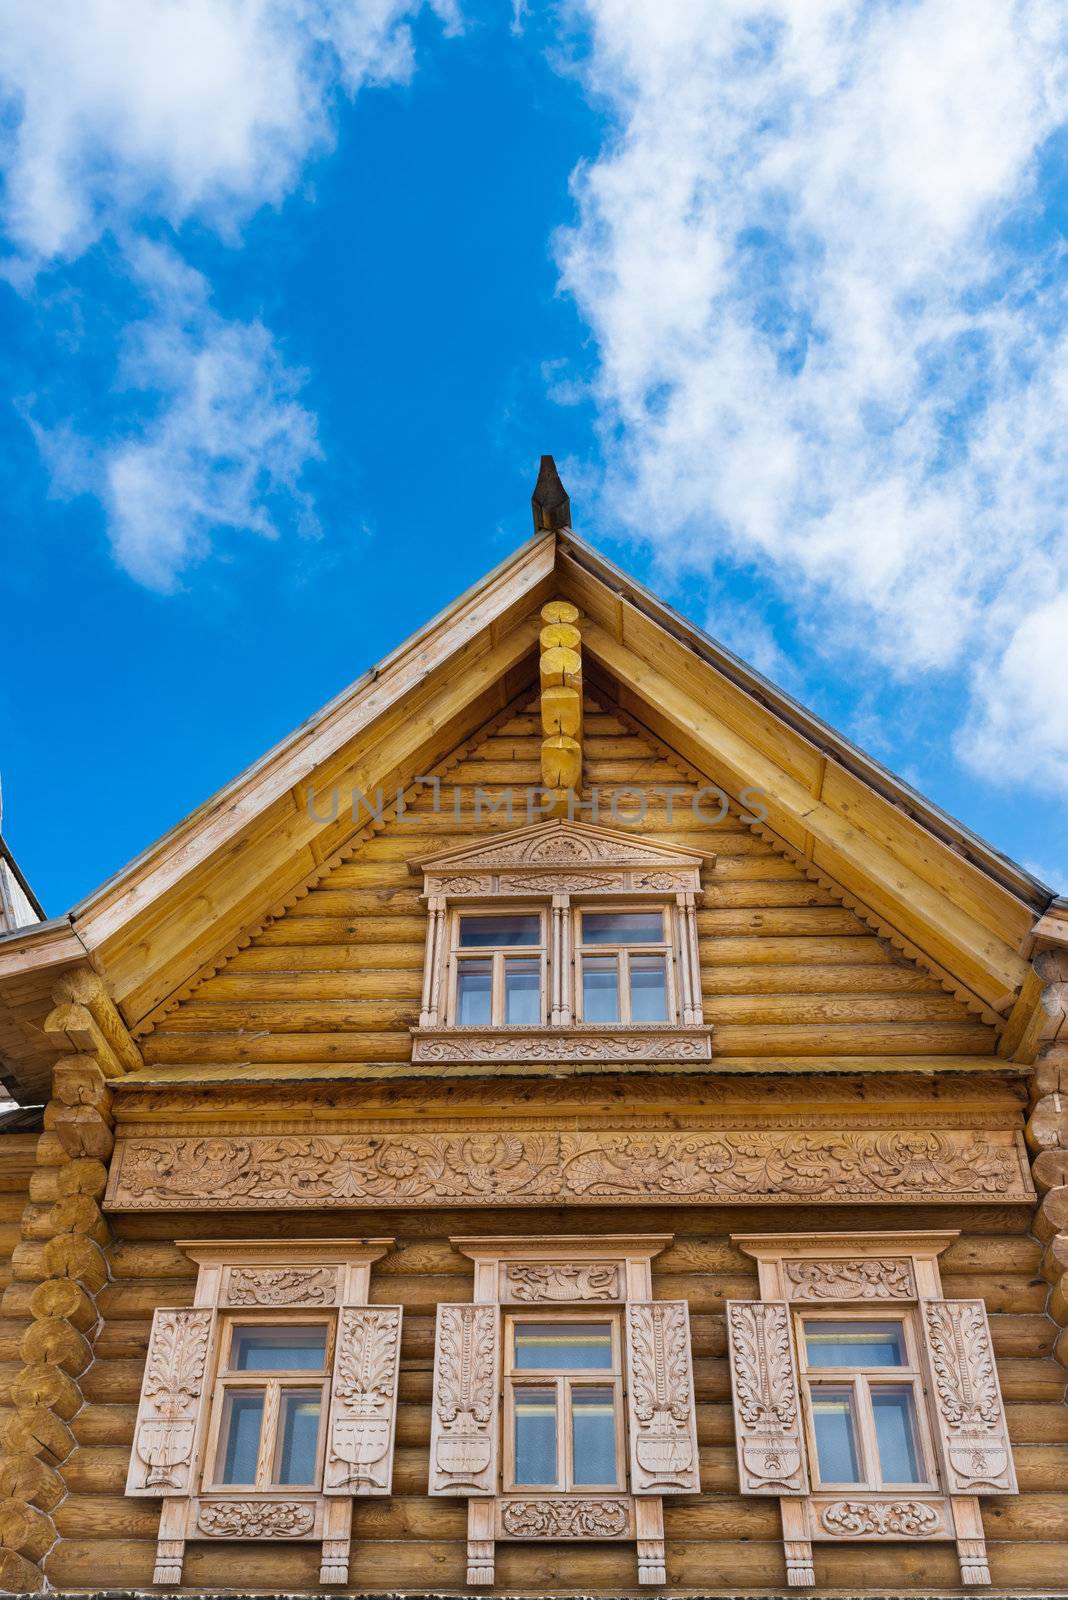 Wooden decorated windows in log house under blue sky, Russian traditional architecture.